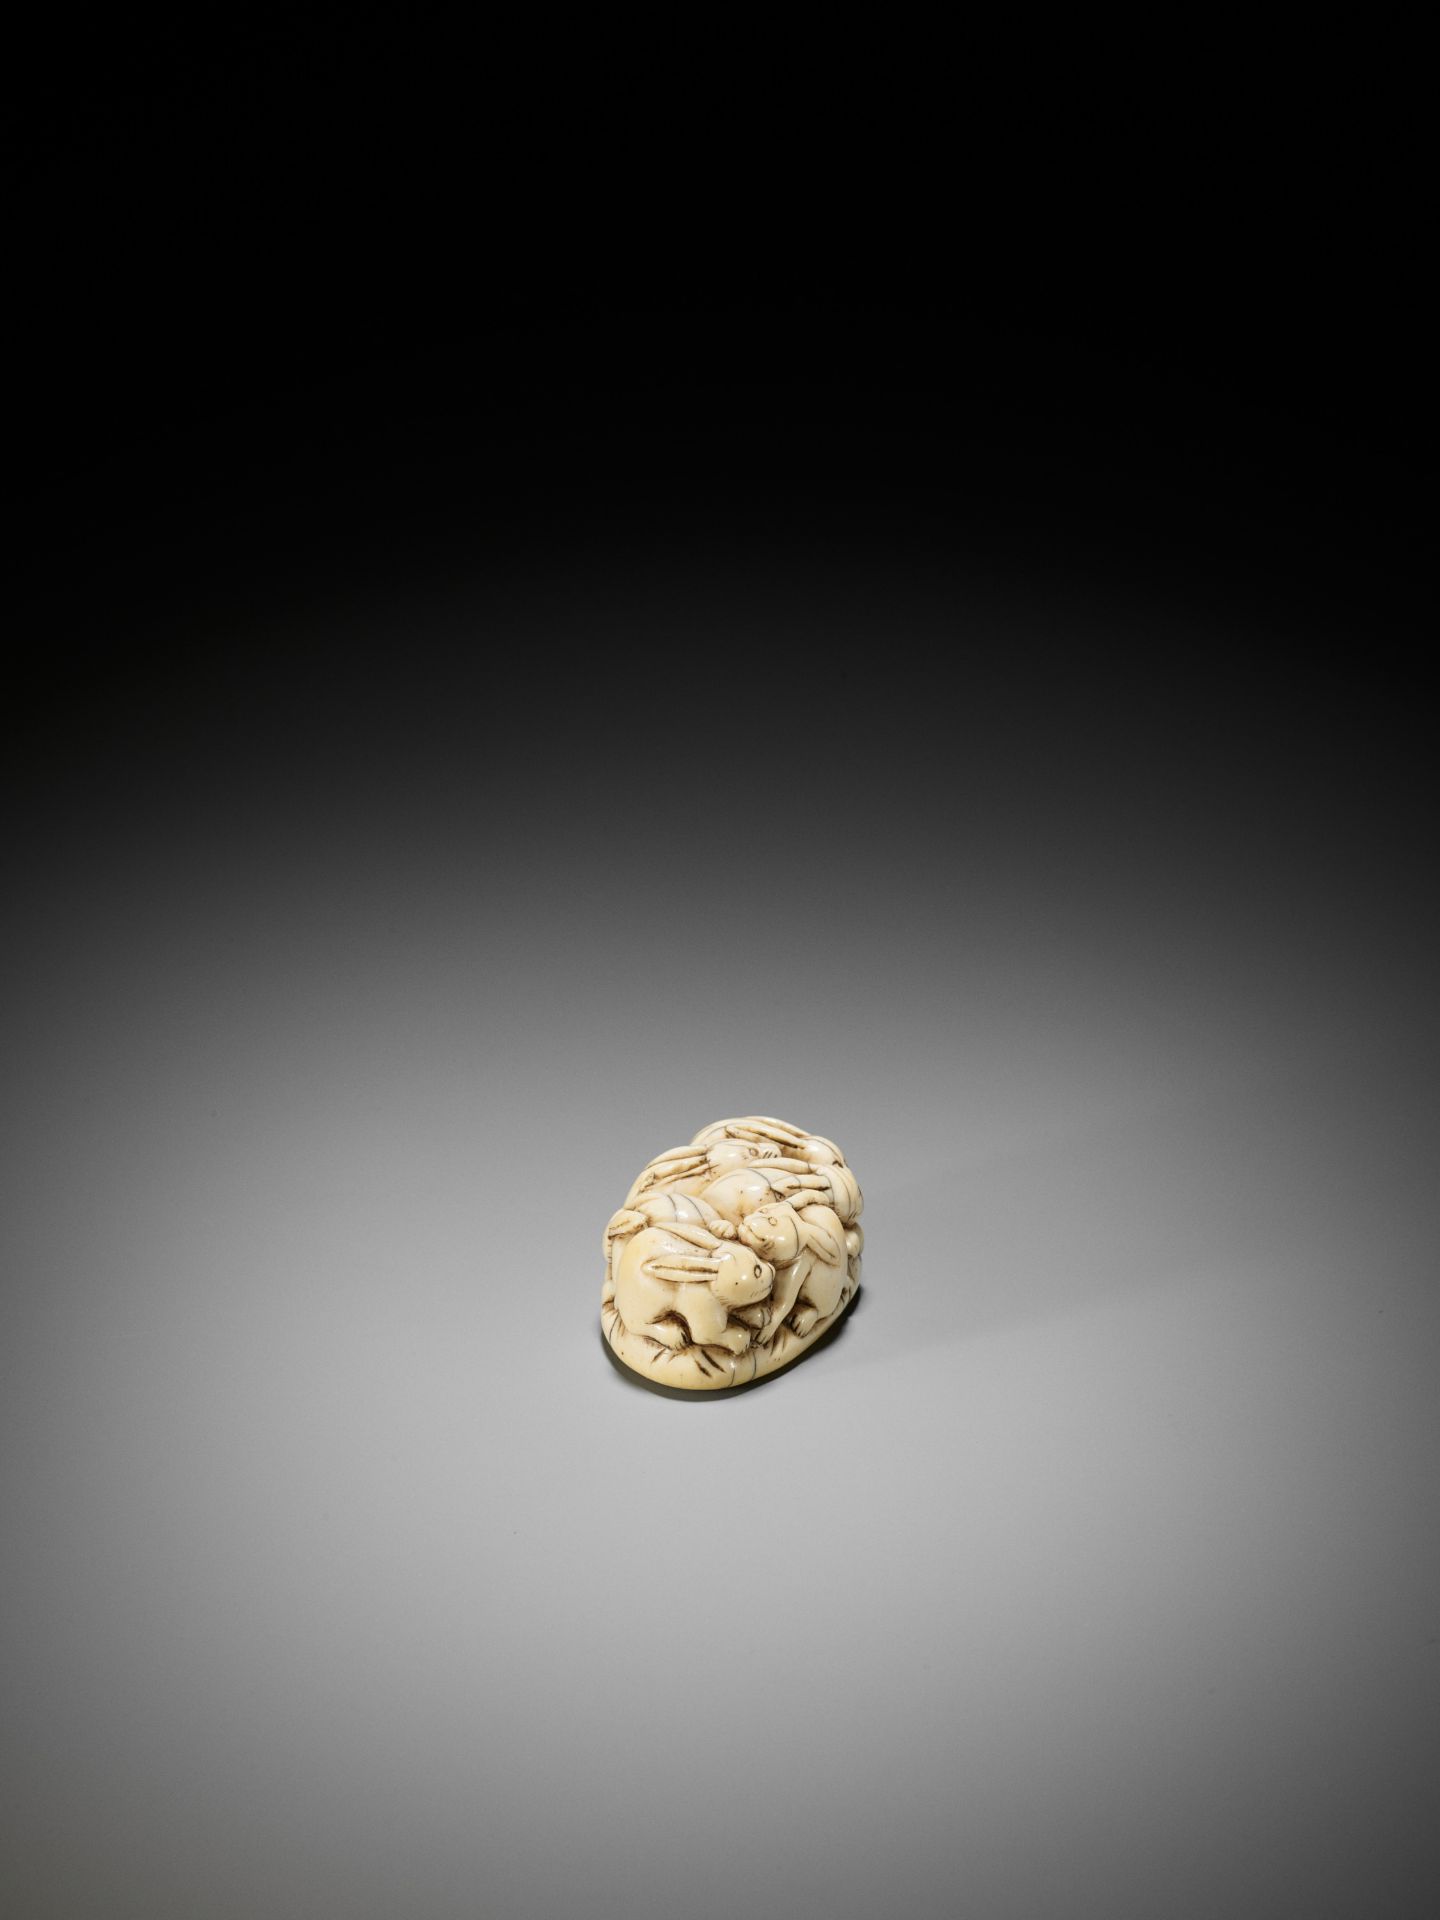 A RARE IVORY NETSUKE OF A PILE OF RABBITS - Image 6 of 8